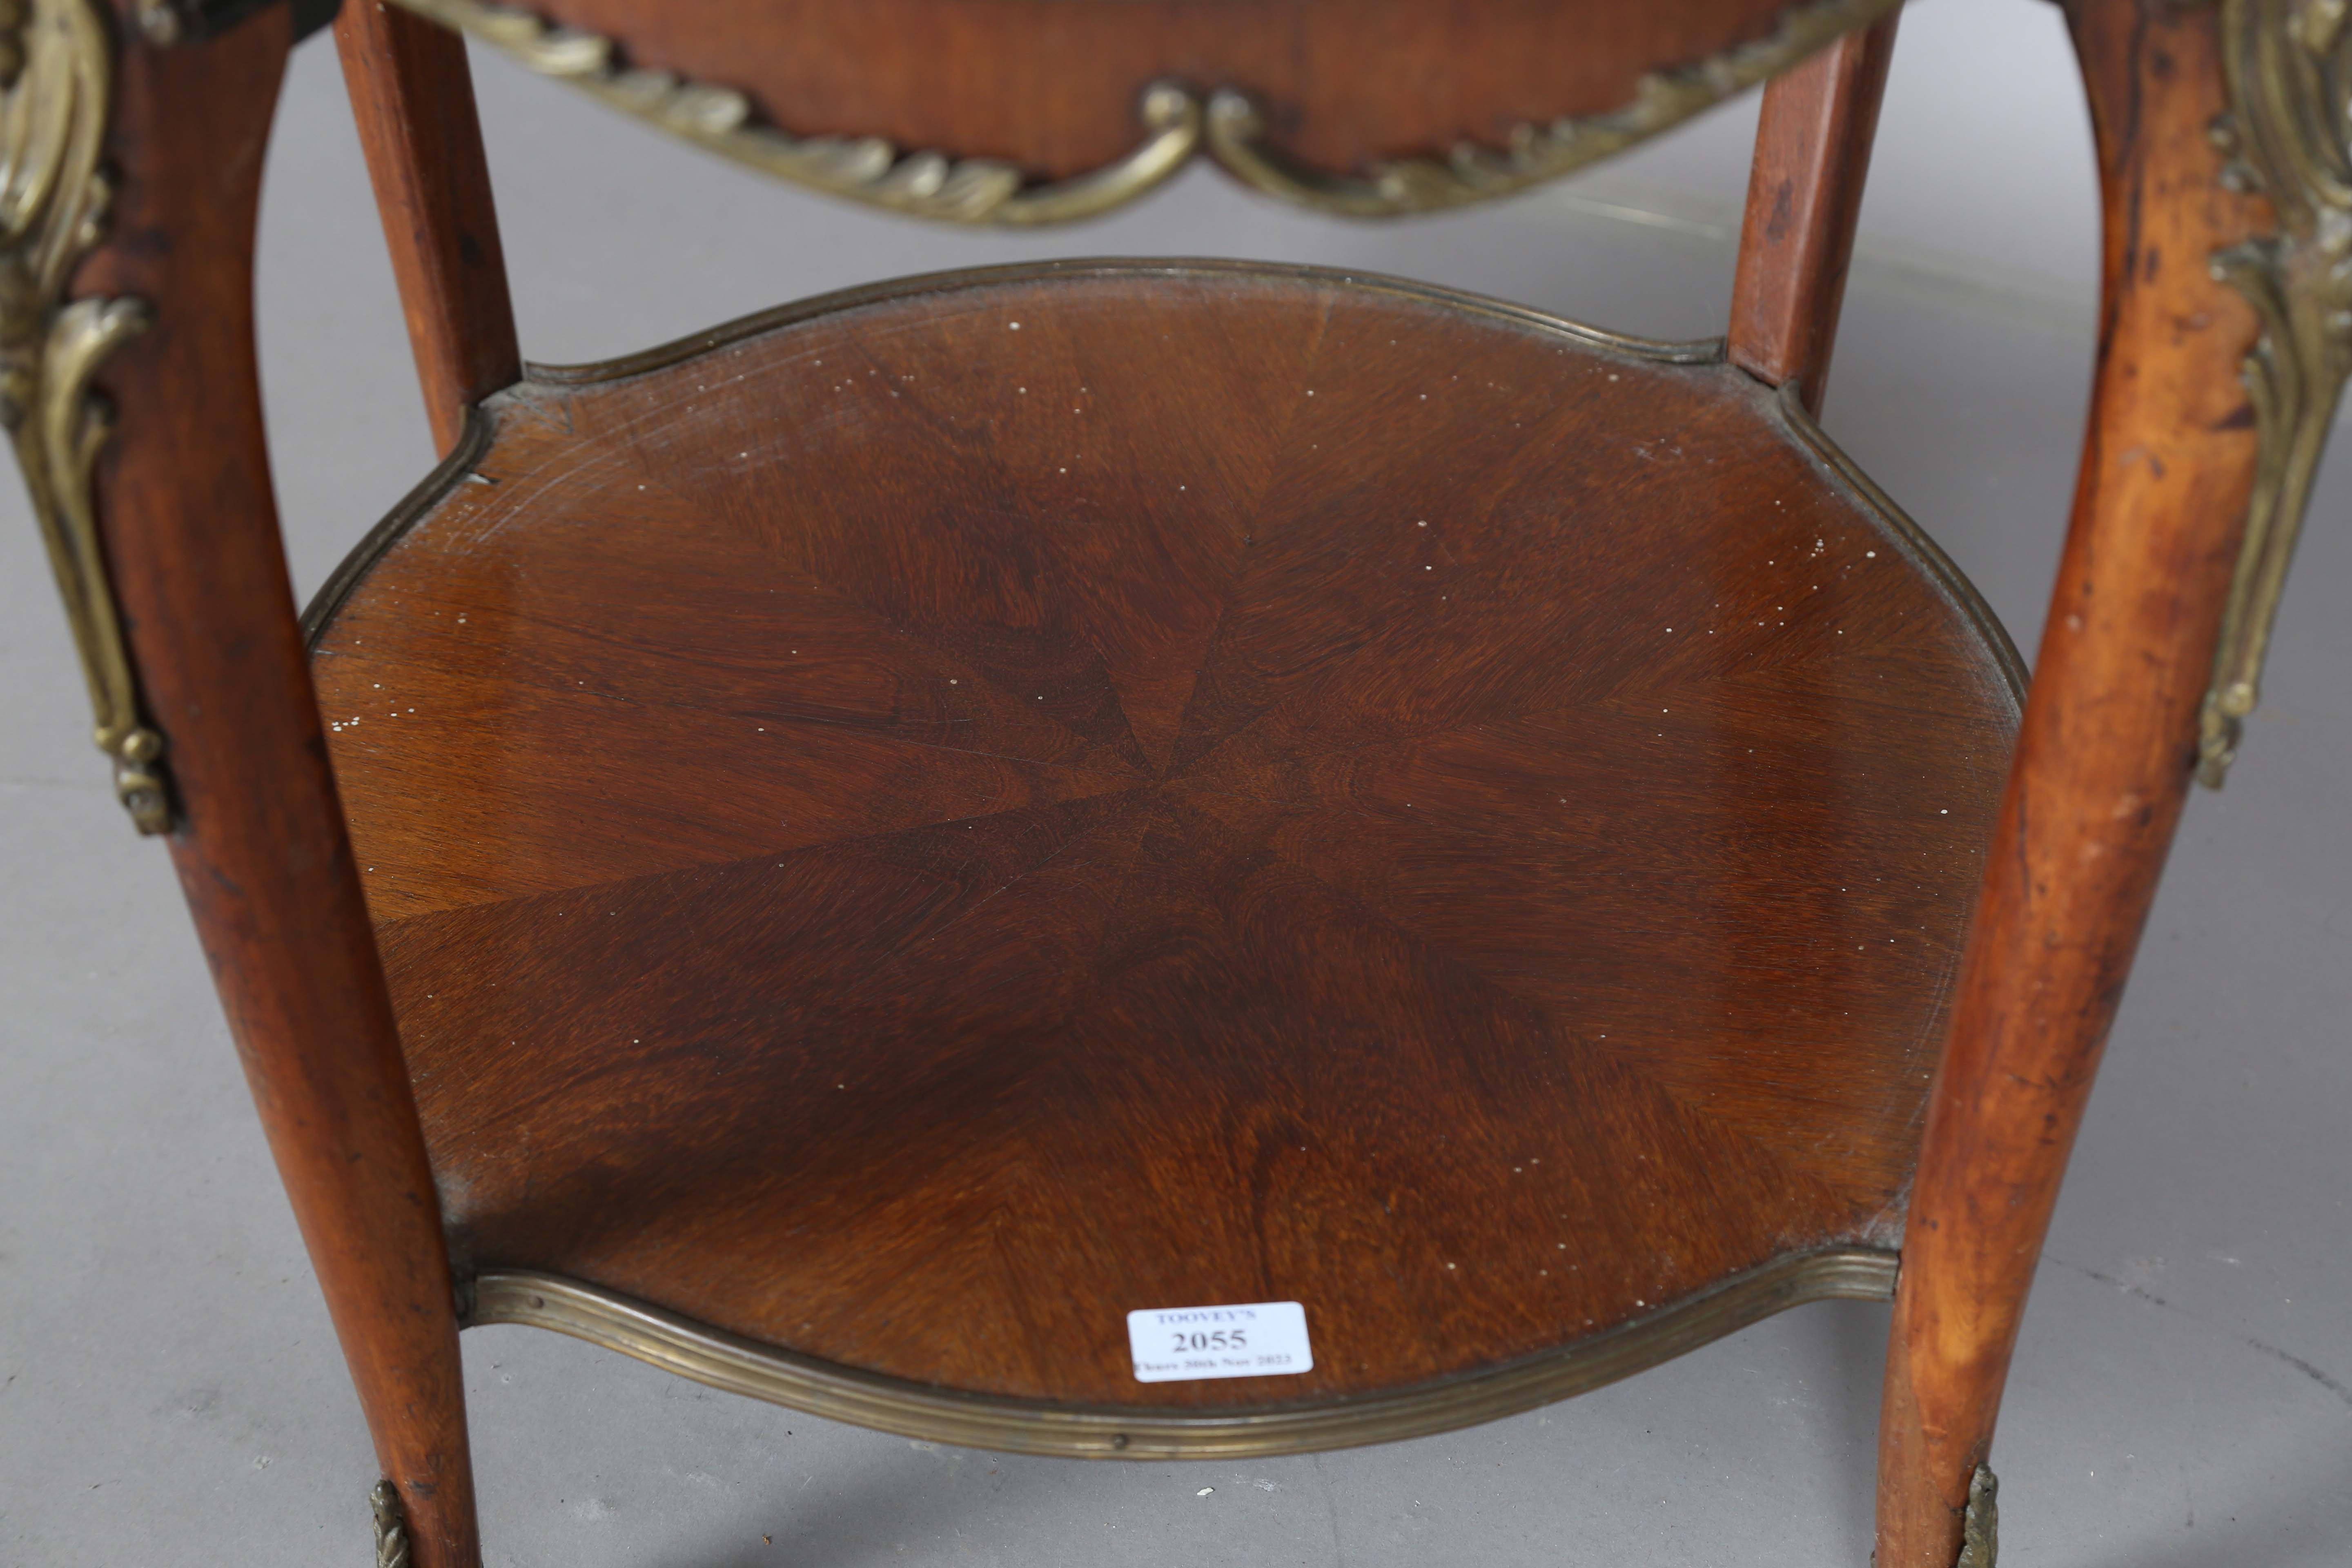 An early 20th century French walnut two-tier occasional table with radial veneers and gilt metal - Image 8 of 11